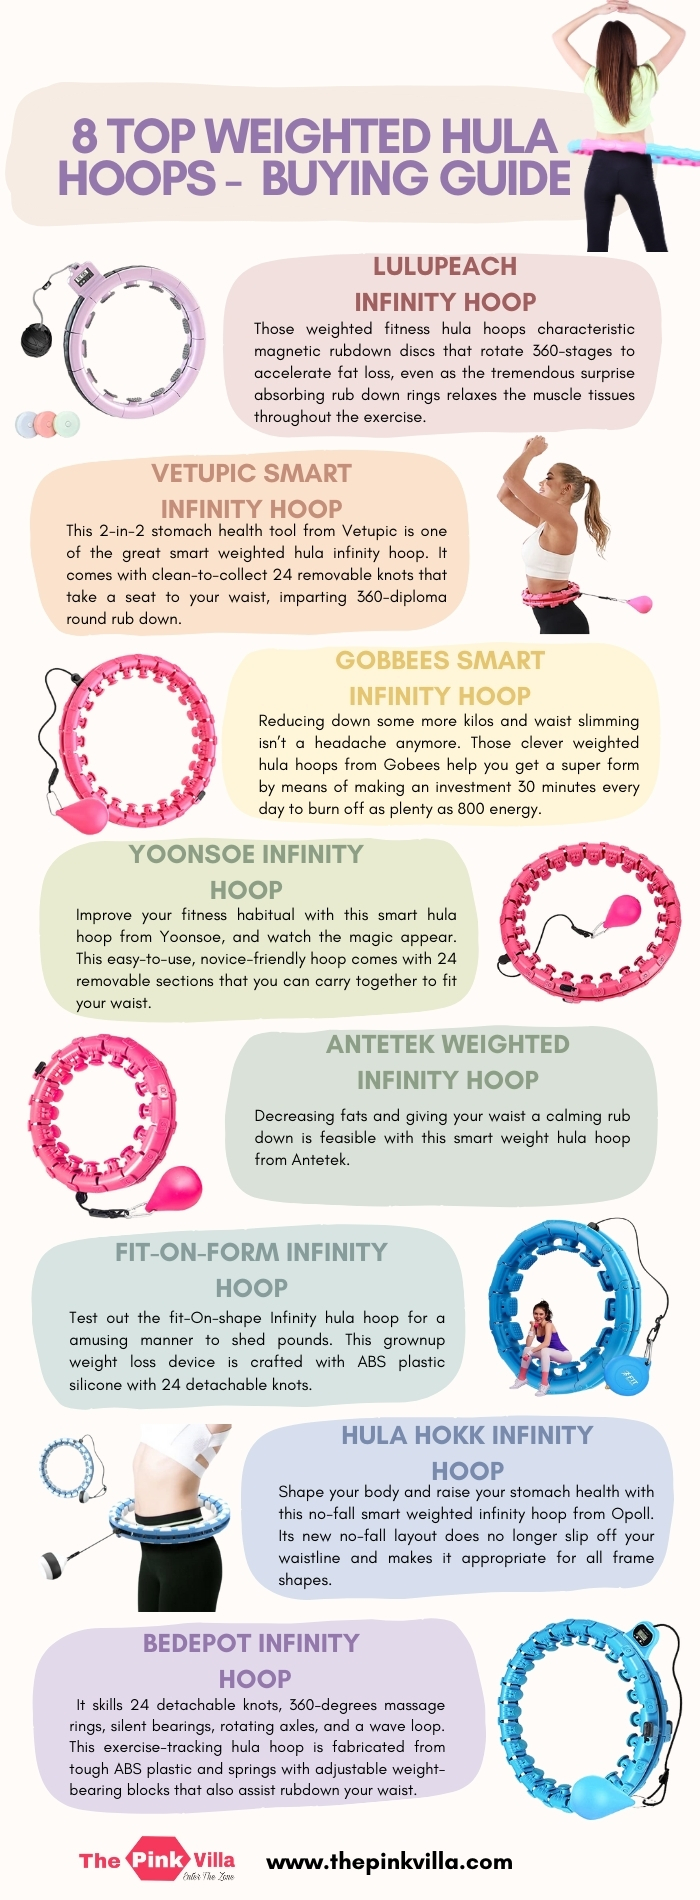 8 Top Weighted Hula Hoops - Buying Guide